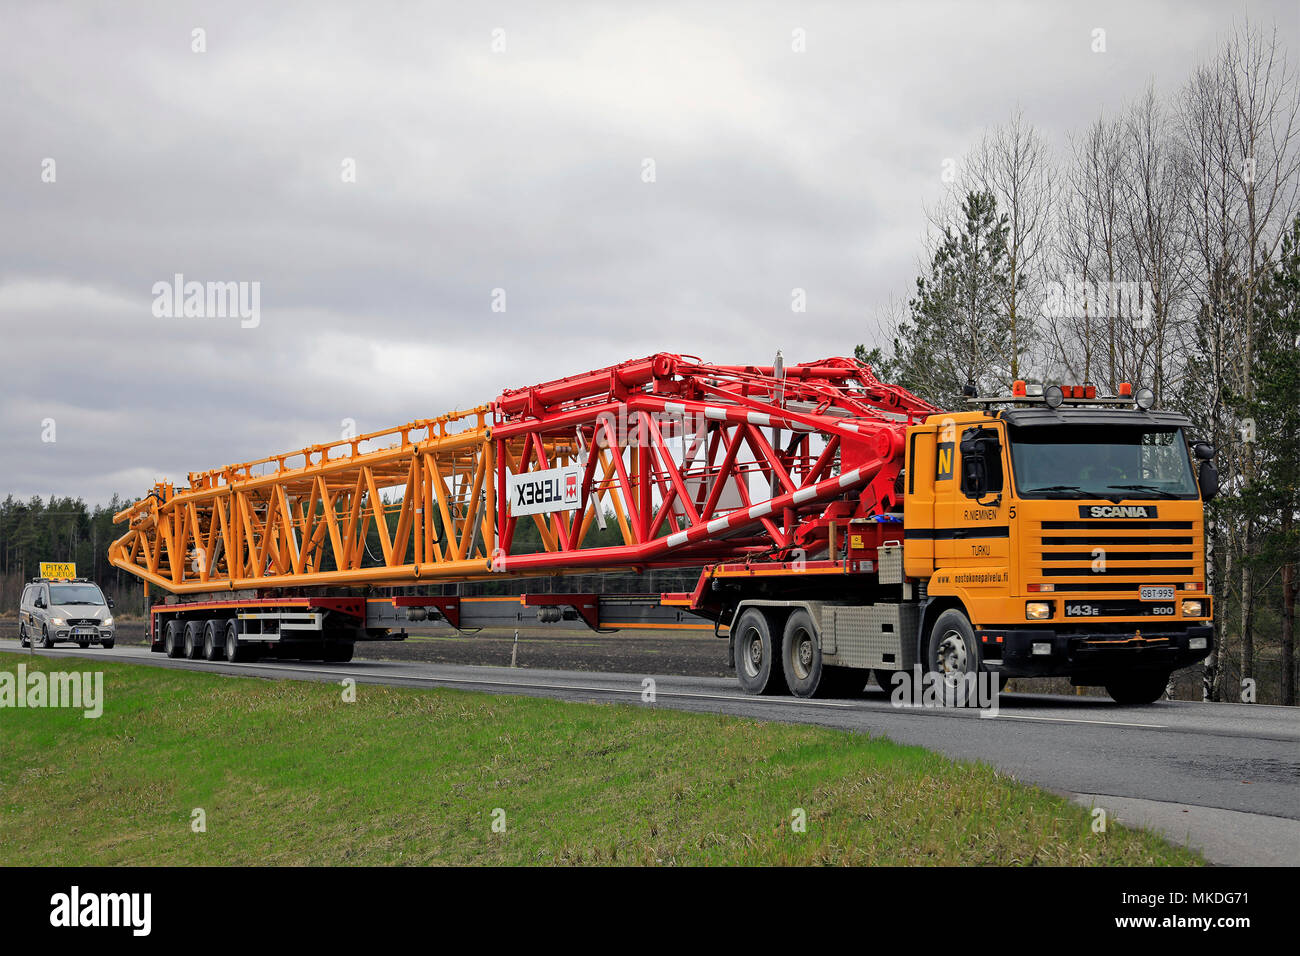 45 metres long oversize transport of Terex lifting equipment on the road. The load requires a pilot car in front of and behind of the long vehicle. Po Stock Photo